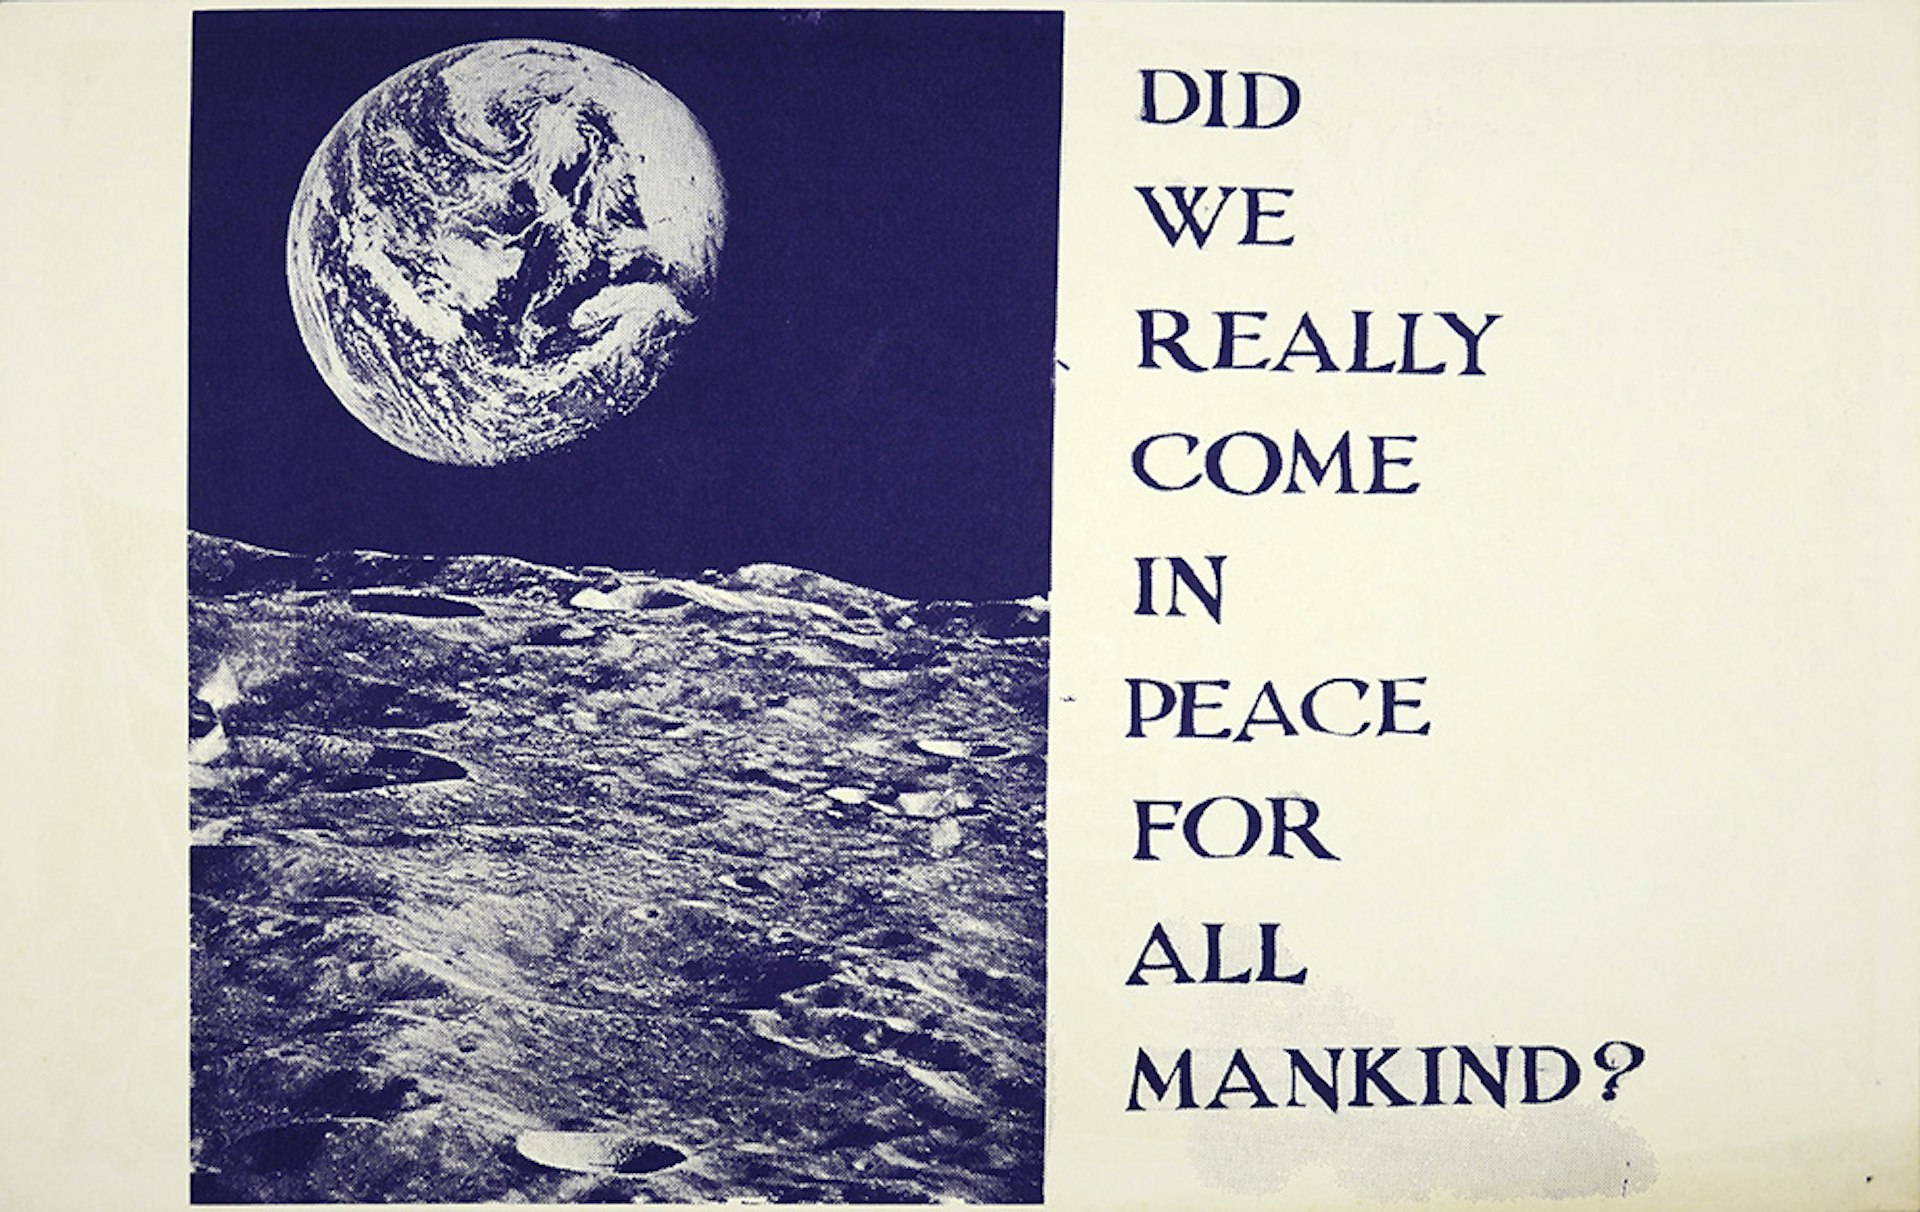 Did We Really Come In Peace For All Mankind?, 1970. Courtesy Shapero Modern.